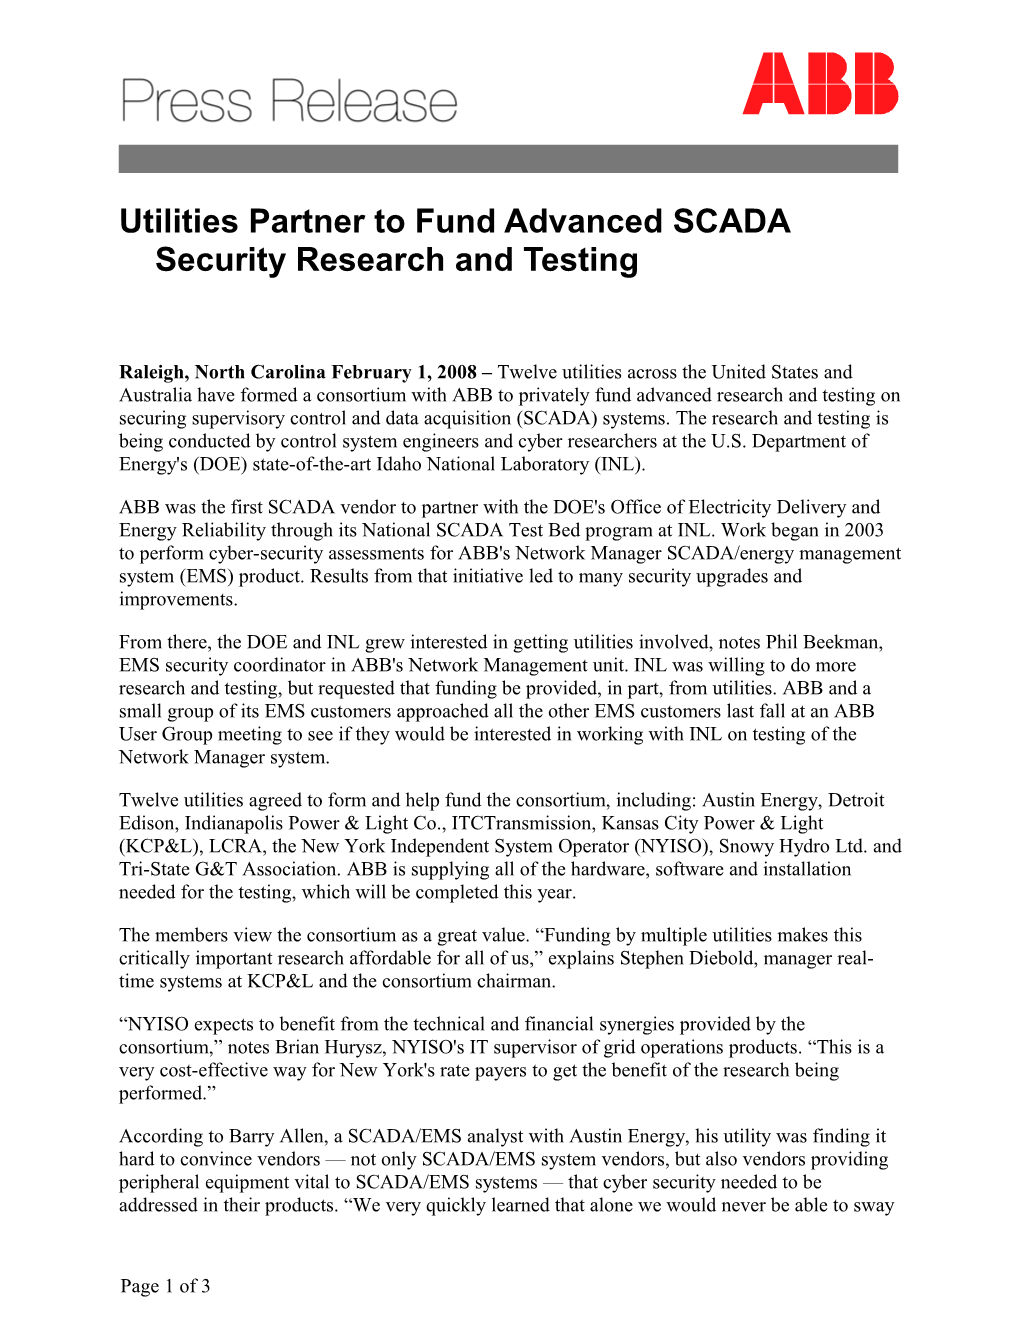 Utilities Partner to Fund Advanced SCADA Security Research and Testing